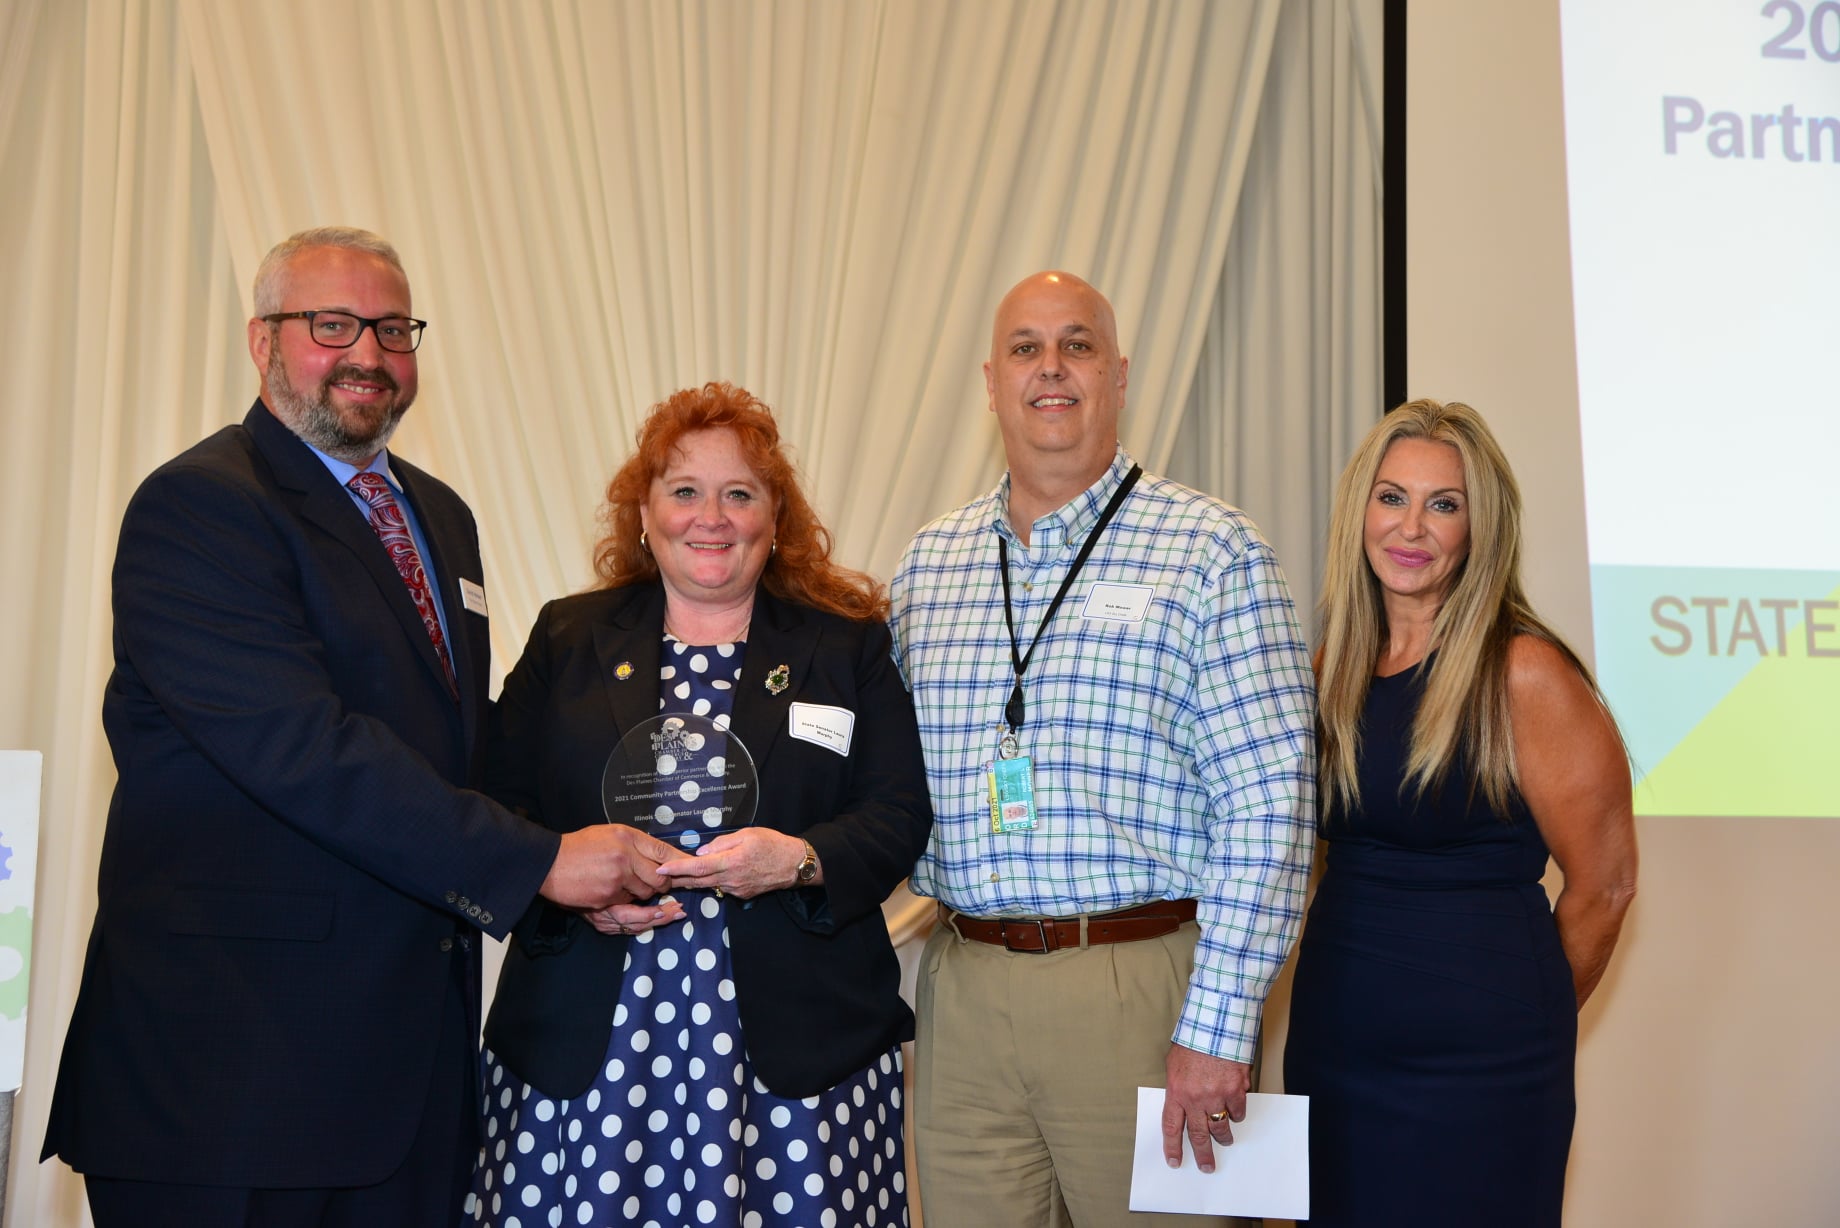 State Senator Laura Murphy (D-Des Plaines) receives the 2021 Des Plaines Chamber Community Partnership Excellence Award from the Des Plaines Chamber of Commerce & Industry on Wednesday, June 16, 2021. From left to right: President of the Heiser Group and 2021 Chamber Board President David Heiser, Senator Laura Murphy, General Manager of LSG Sky Chefs Rob Mower, and Chamber Executive Director Andrea Biwer.